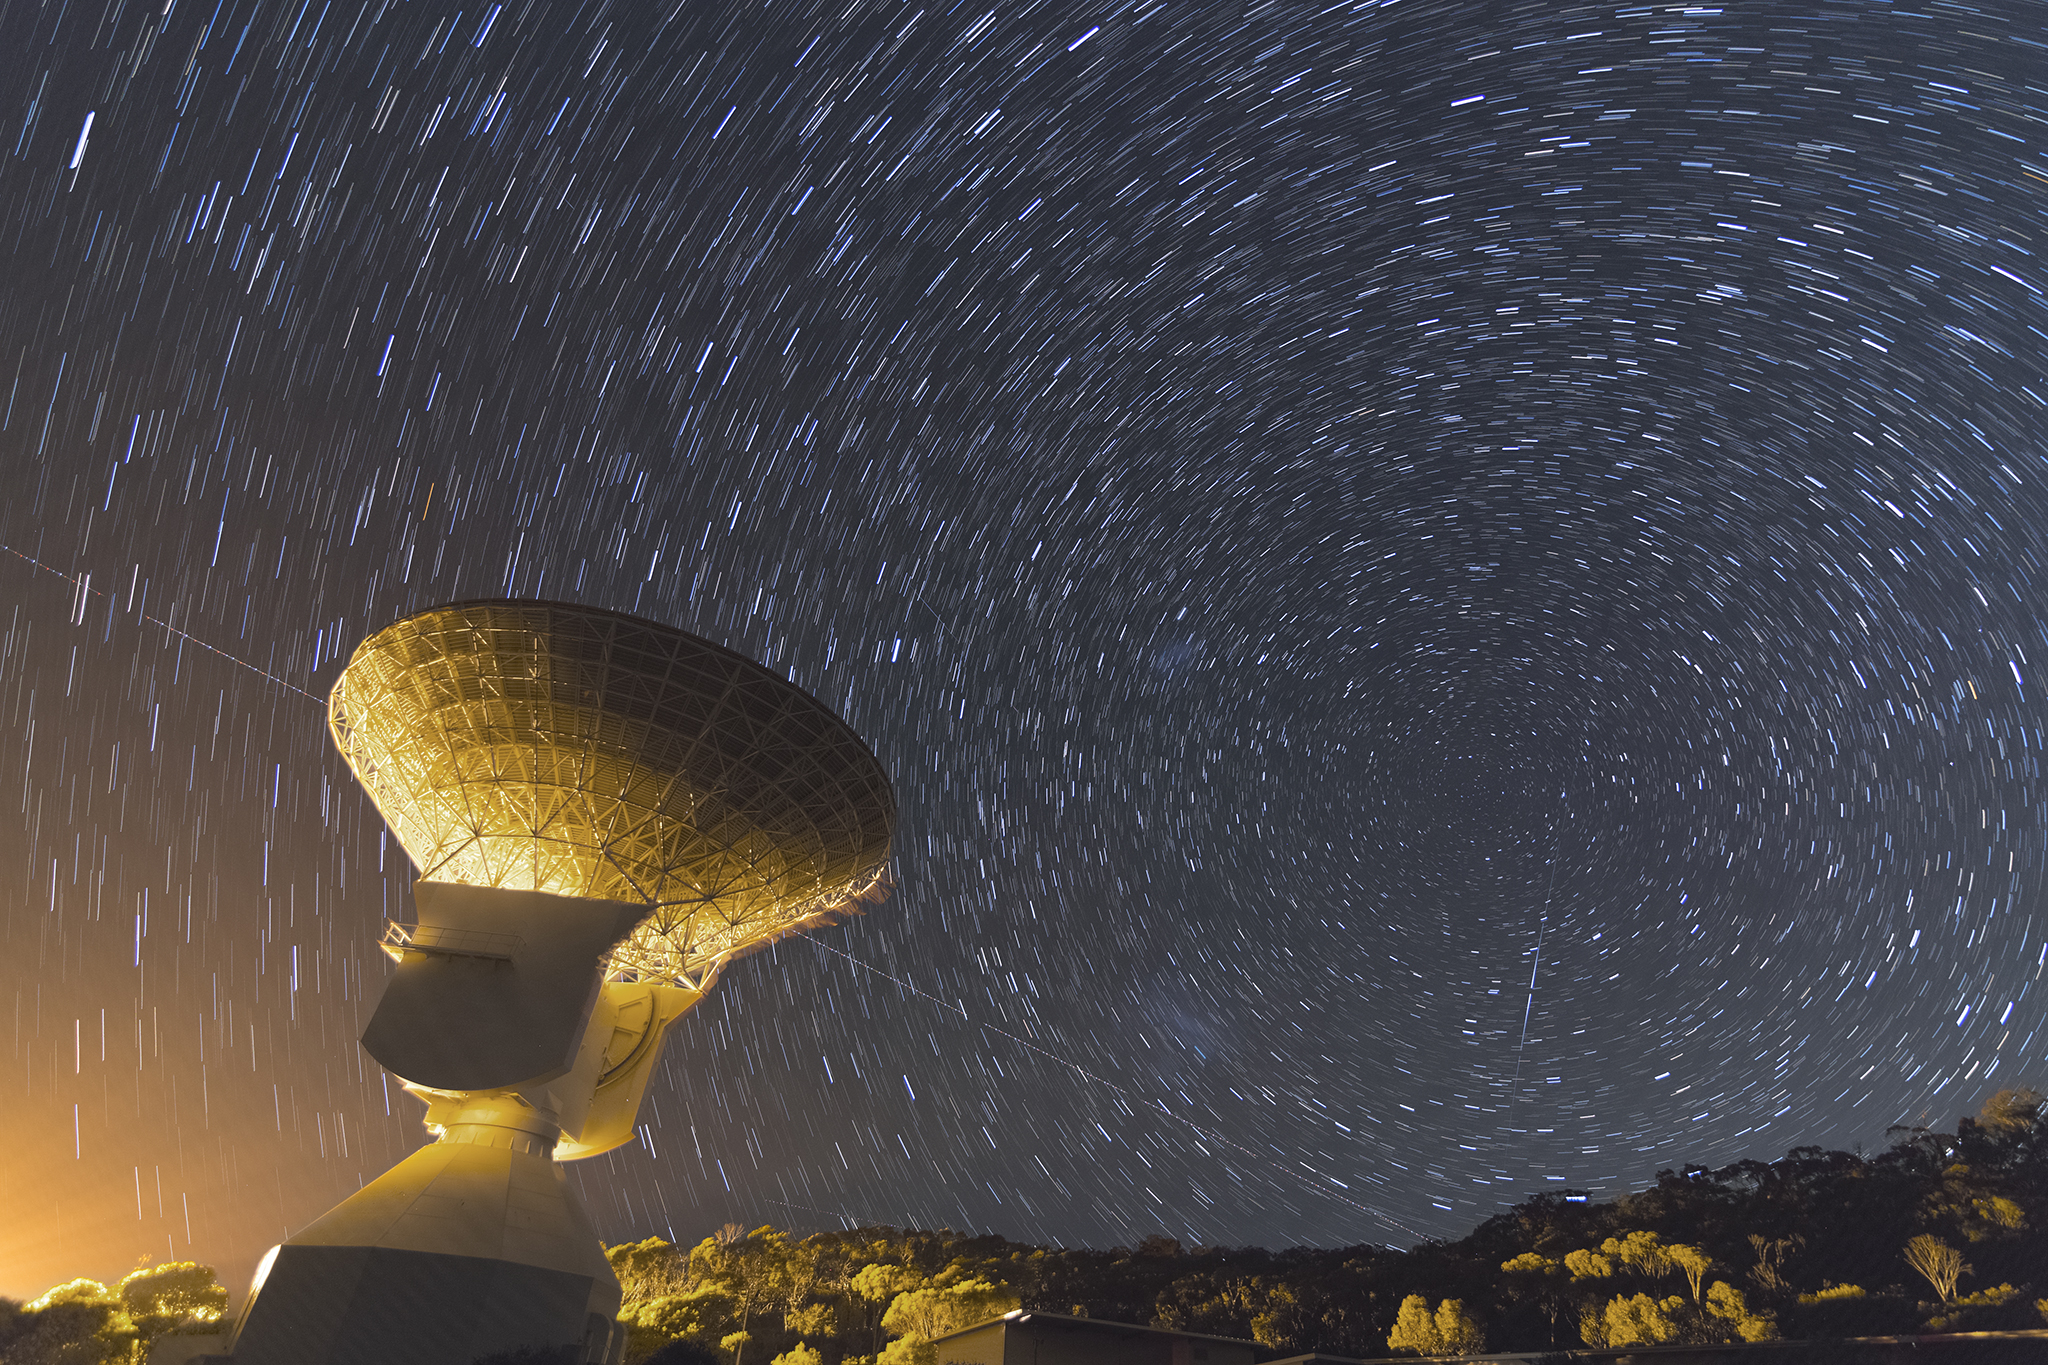 New Norcia Station, Deep Space Tracking Station, Western Australia by Dylan O’Donnell